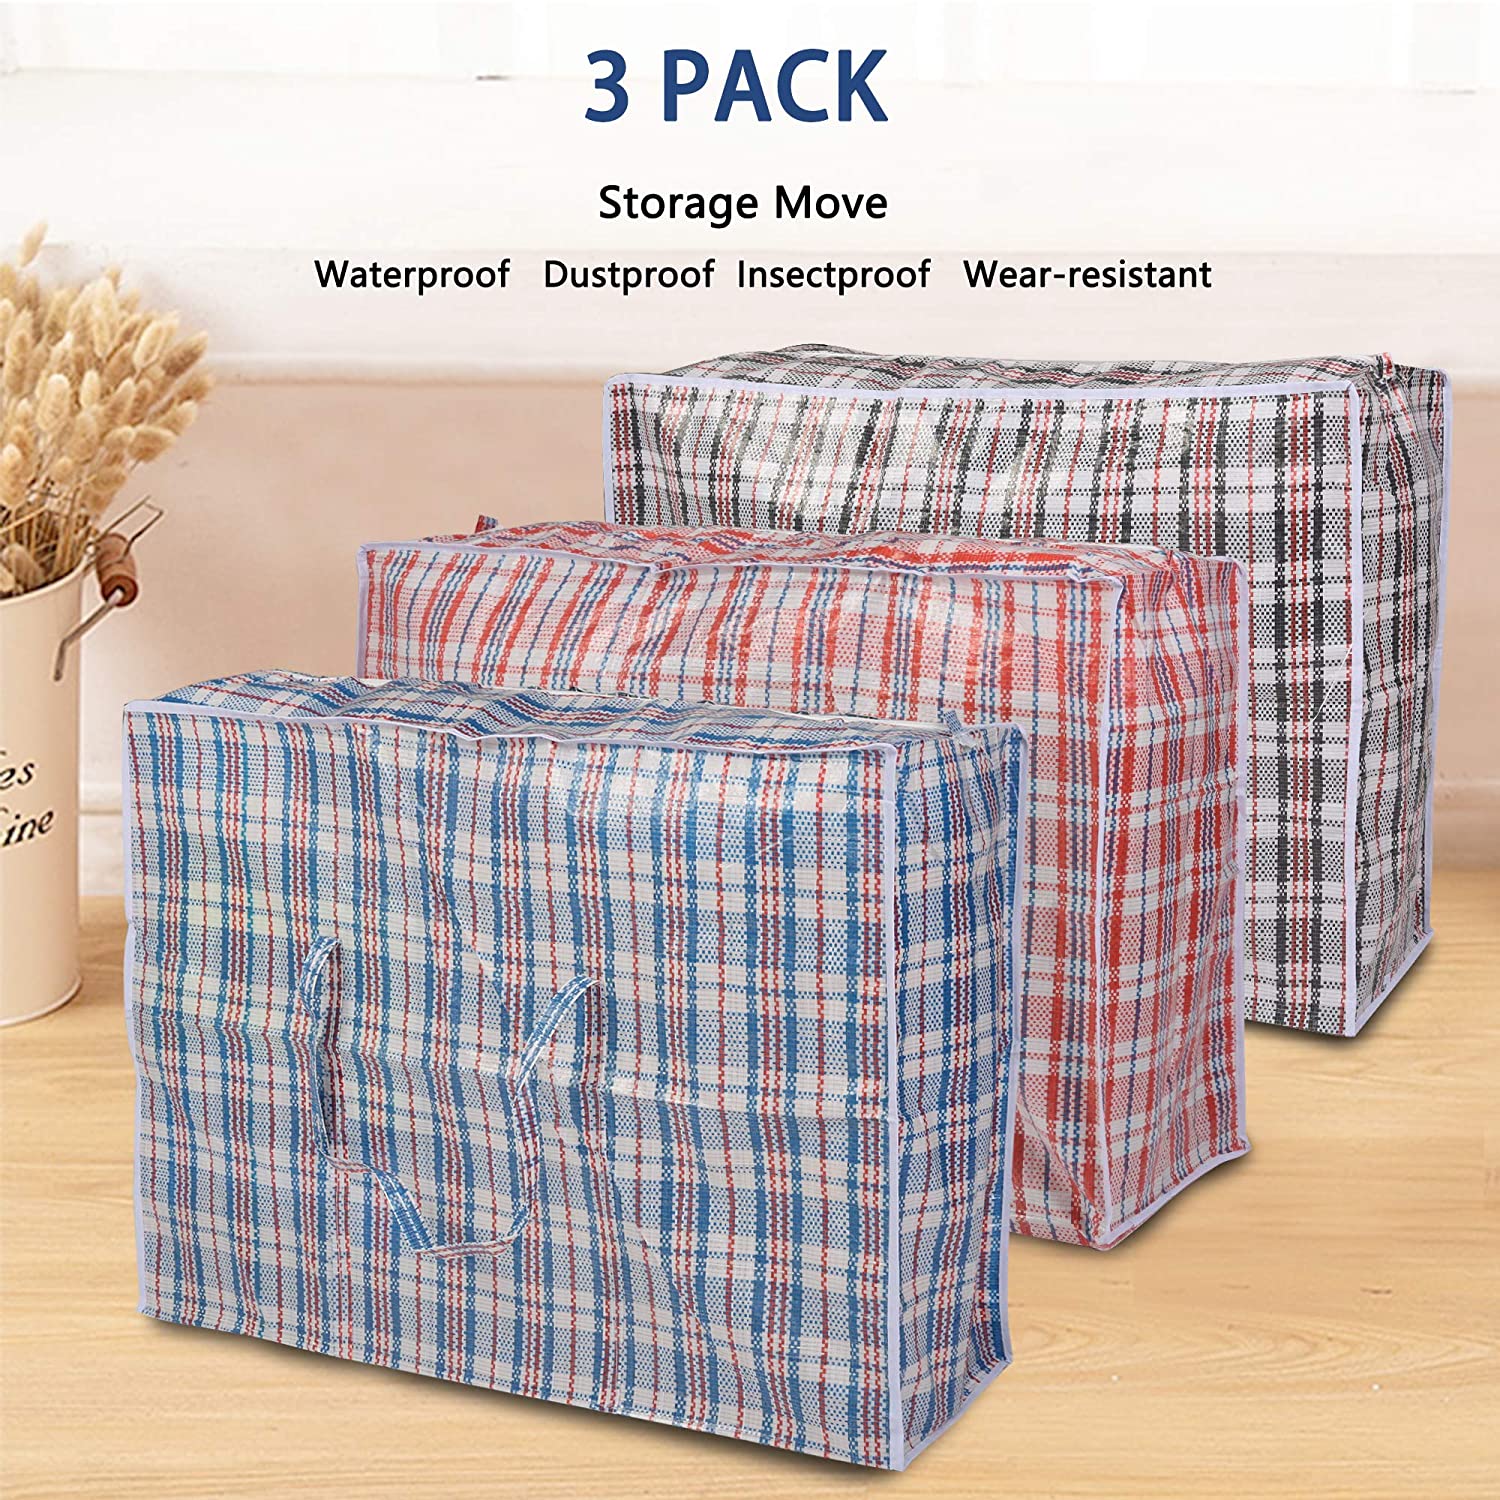 3PC Plastic Woven Storage Bag Moving Tote Clothes Laundry Travel Organizer w/ Zipper & Handles